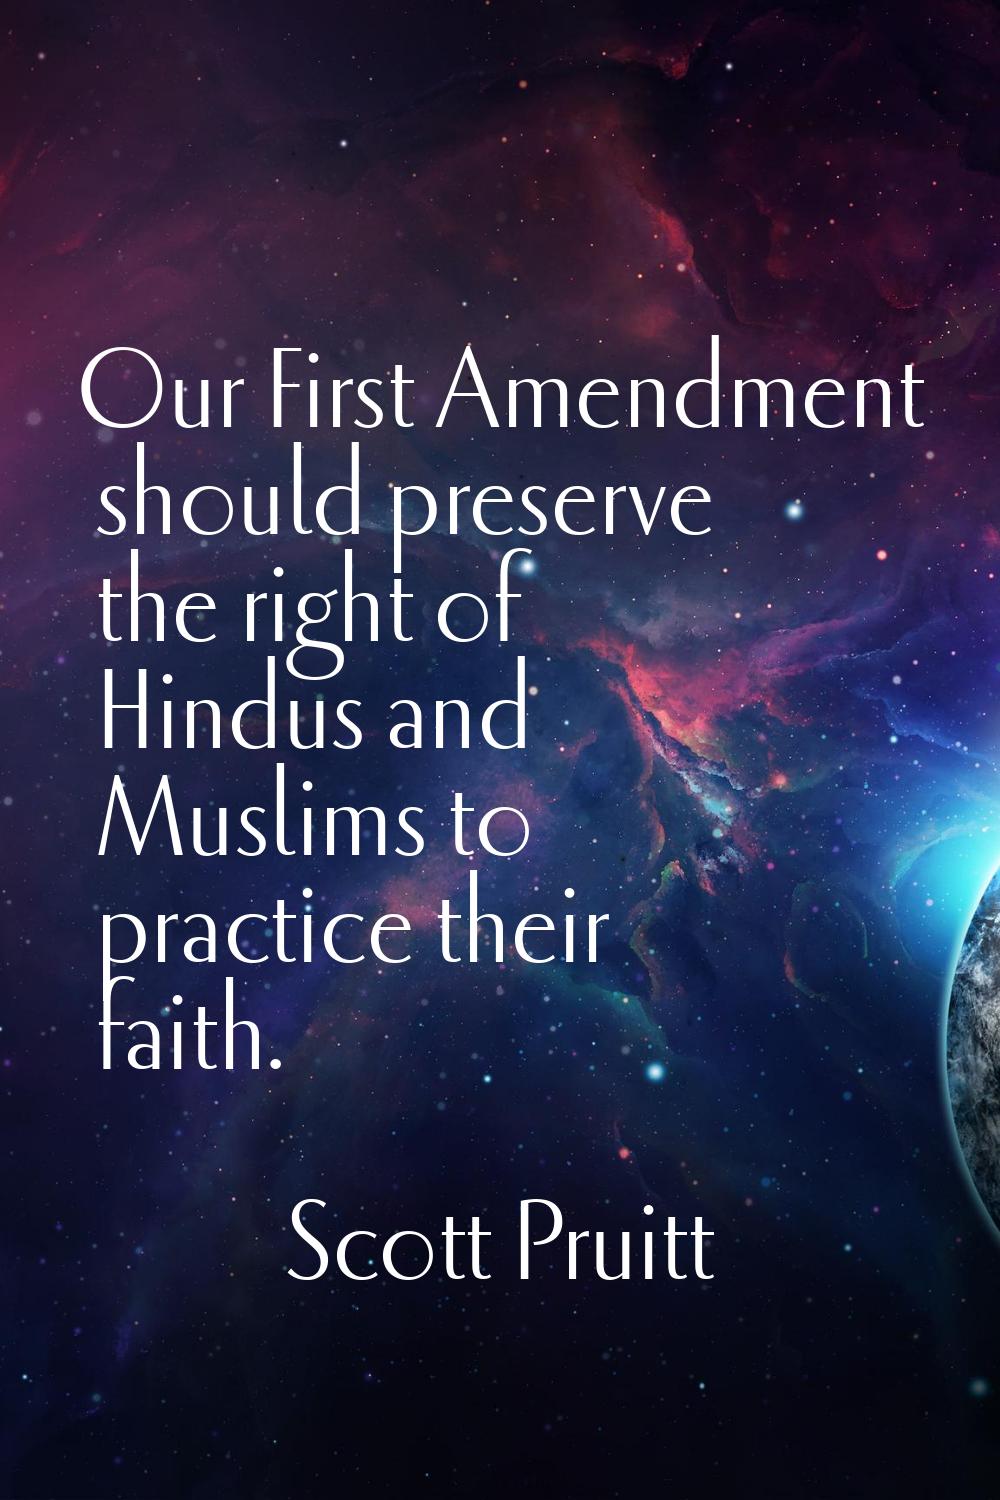 Our First Amendment should preserve the right of Hindus and Muslims to practice their faith.